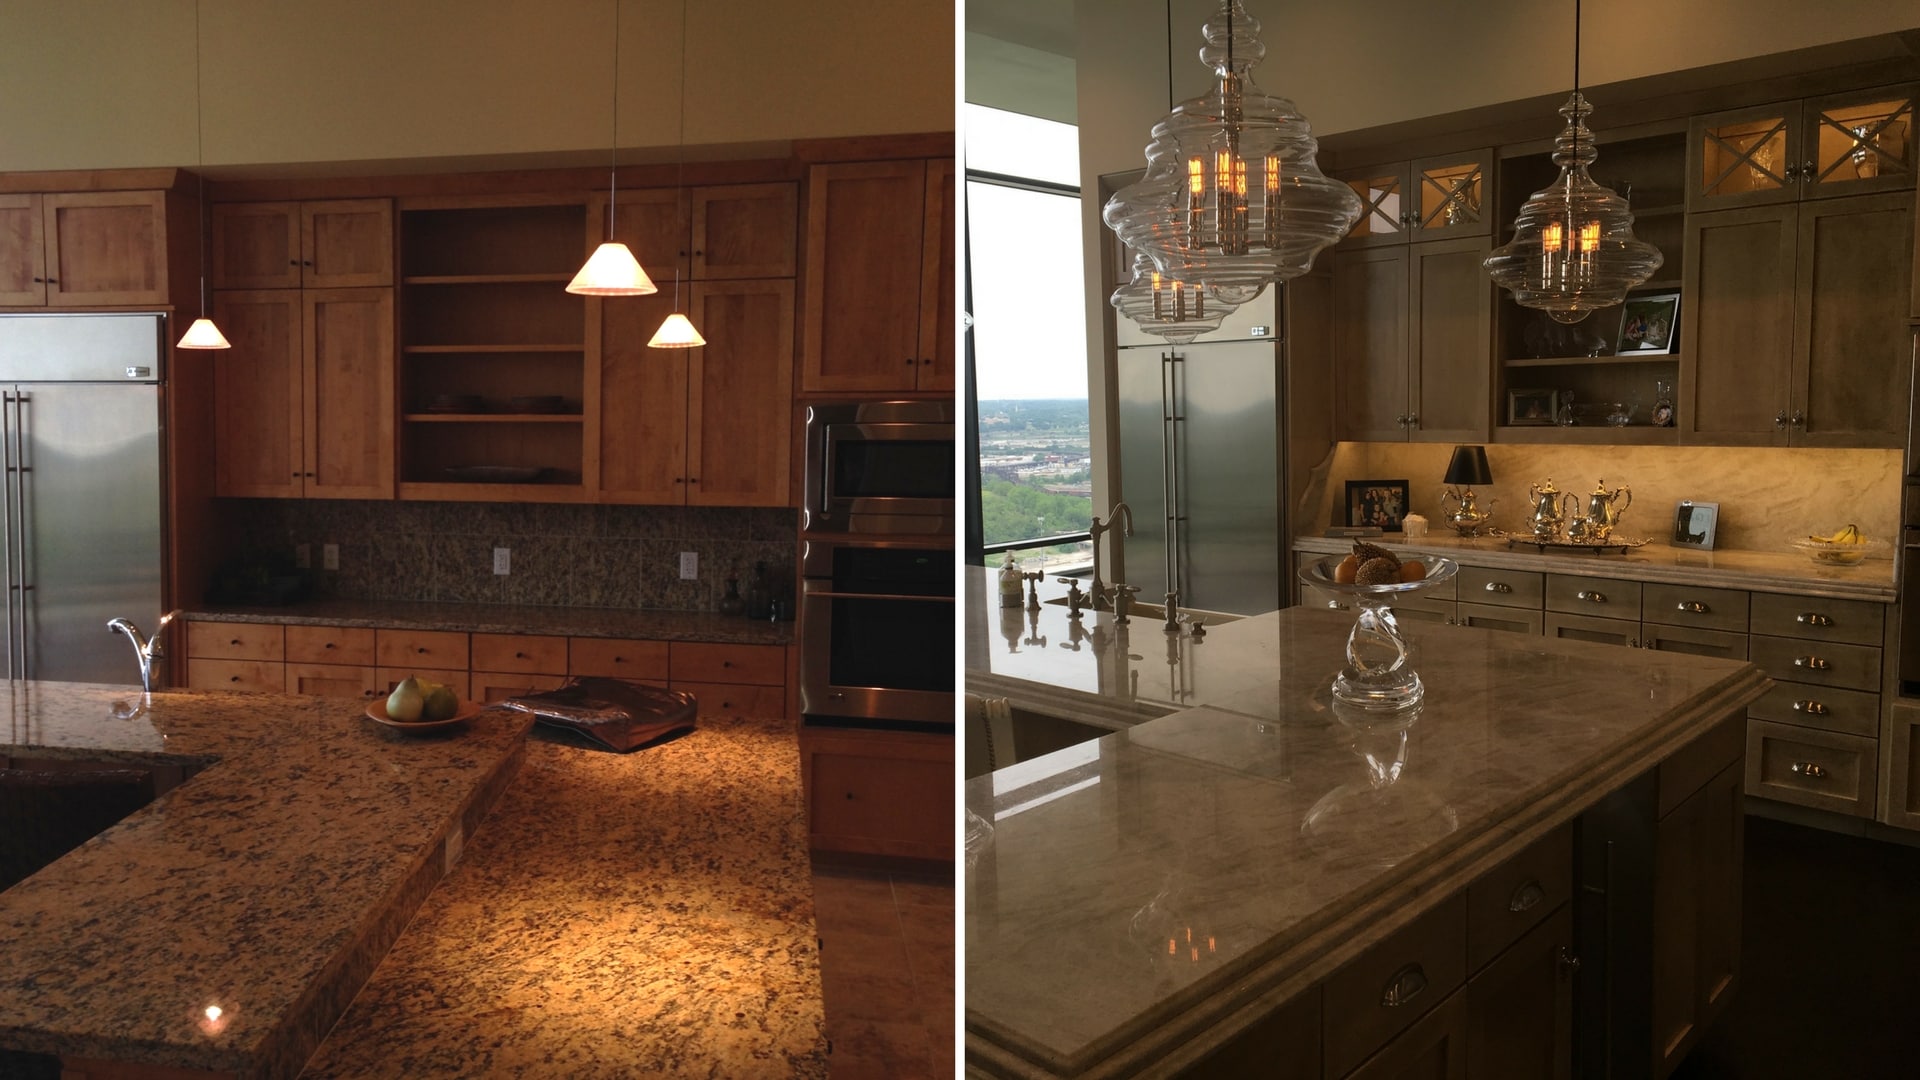 Penthouse Kitchen Before and After